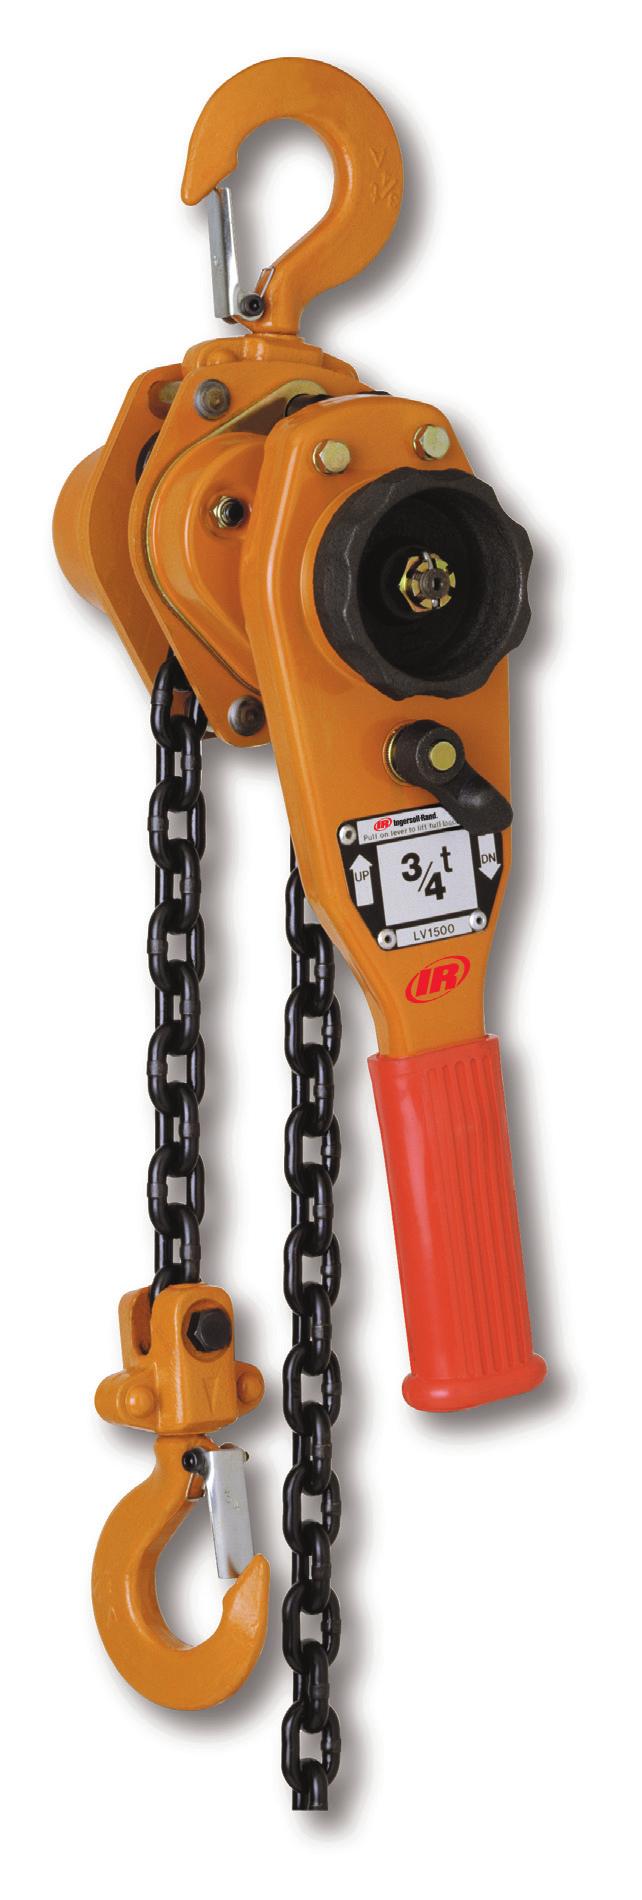 LV lassic Series Lever hain Hoist 3/4 6 metric ton Line Pull apacity Lever hain Hoists rugged, dependable lever chain hoist with capacities and features that make it ideal for all industrial lifting,